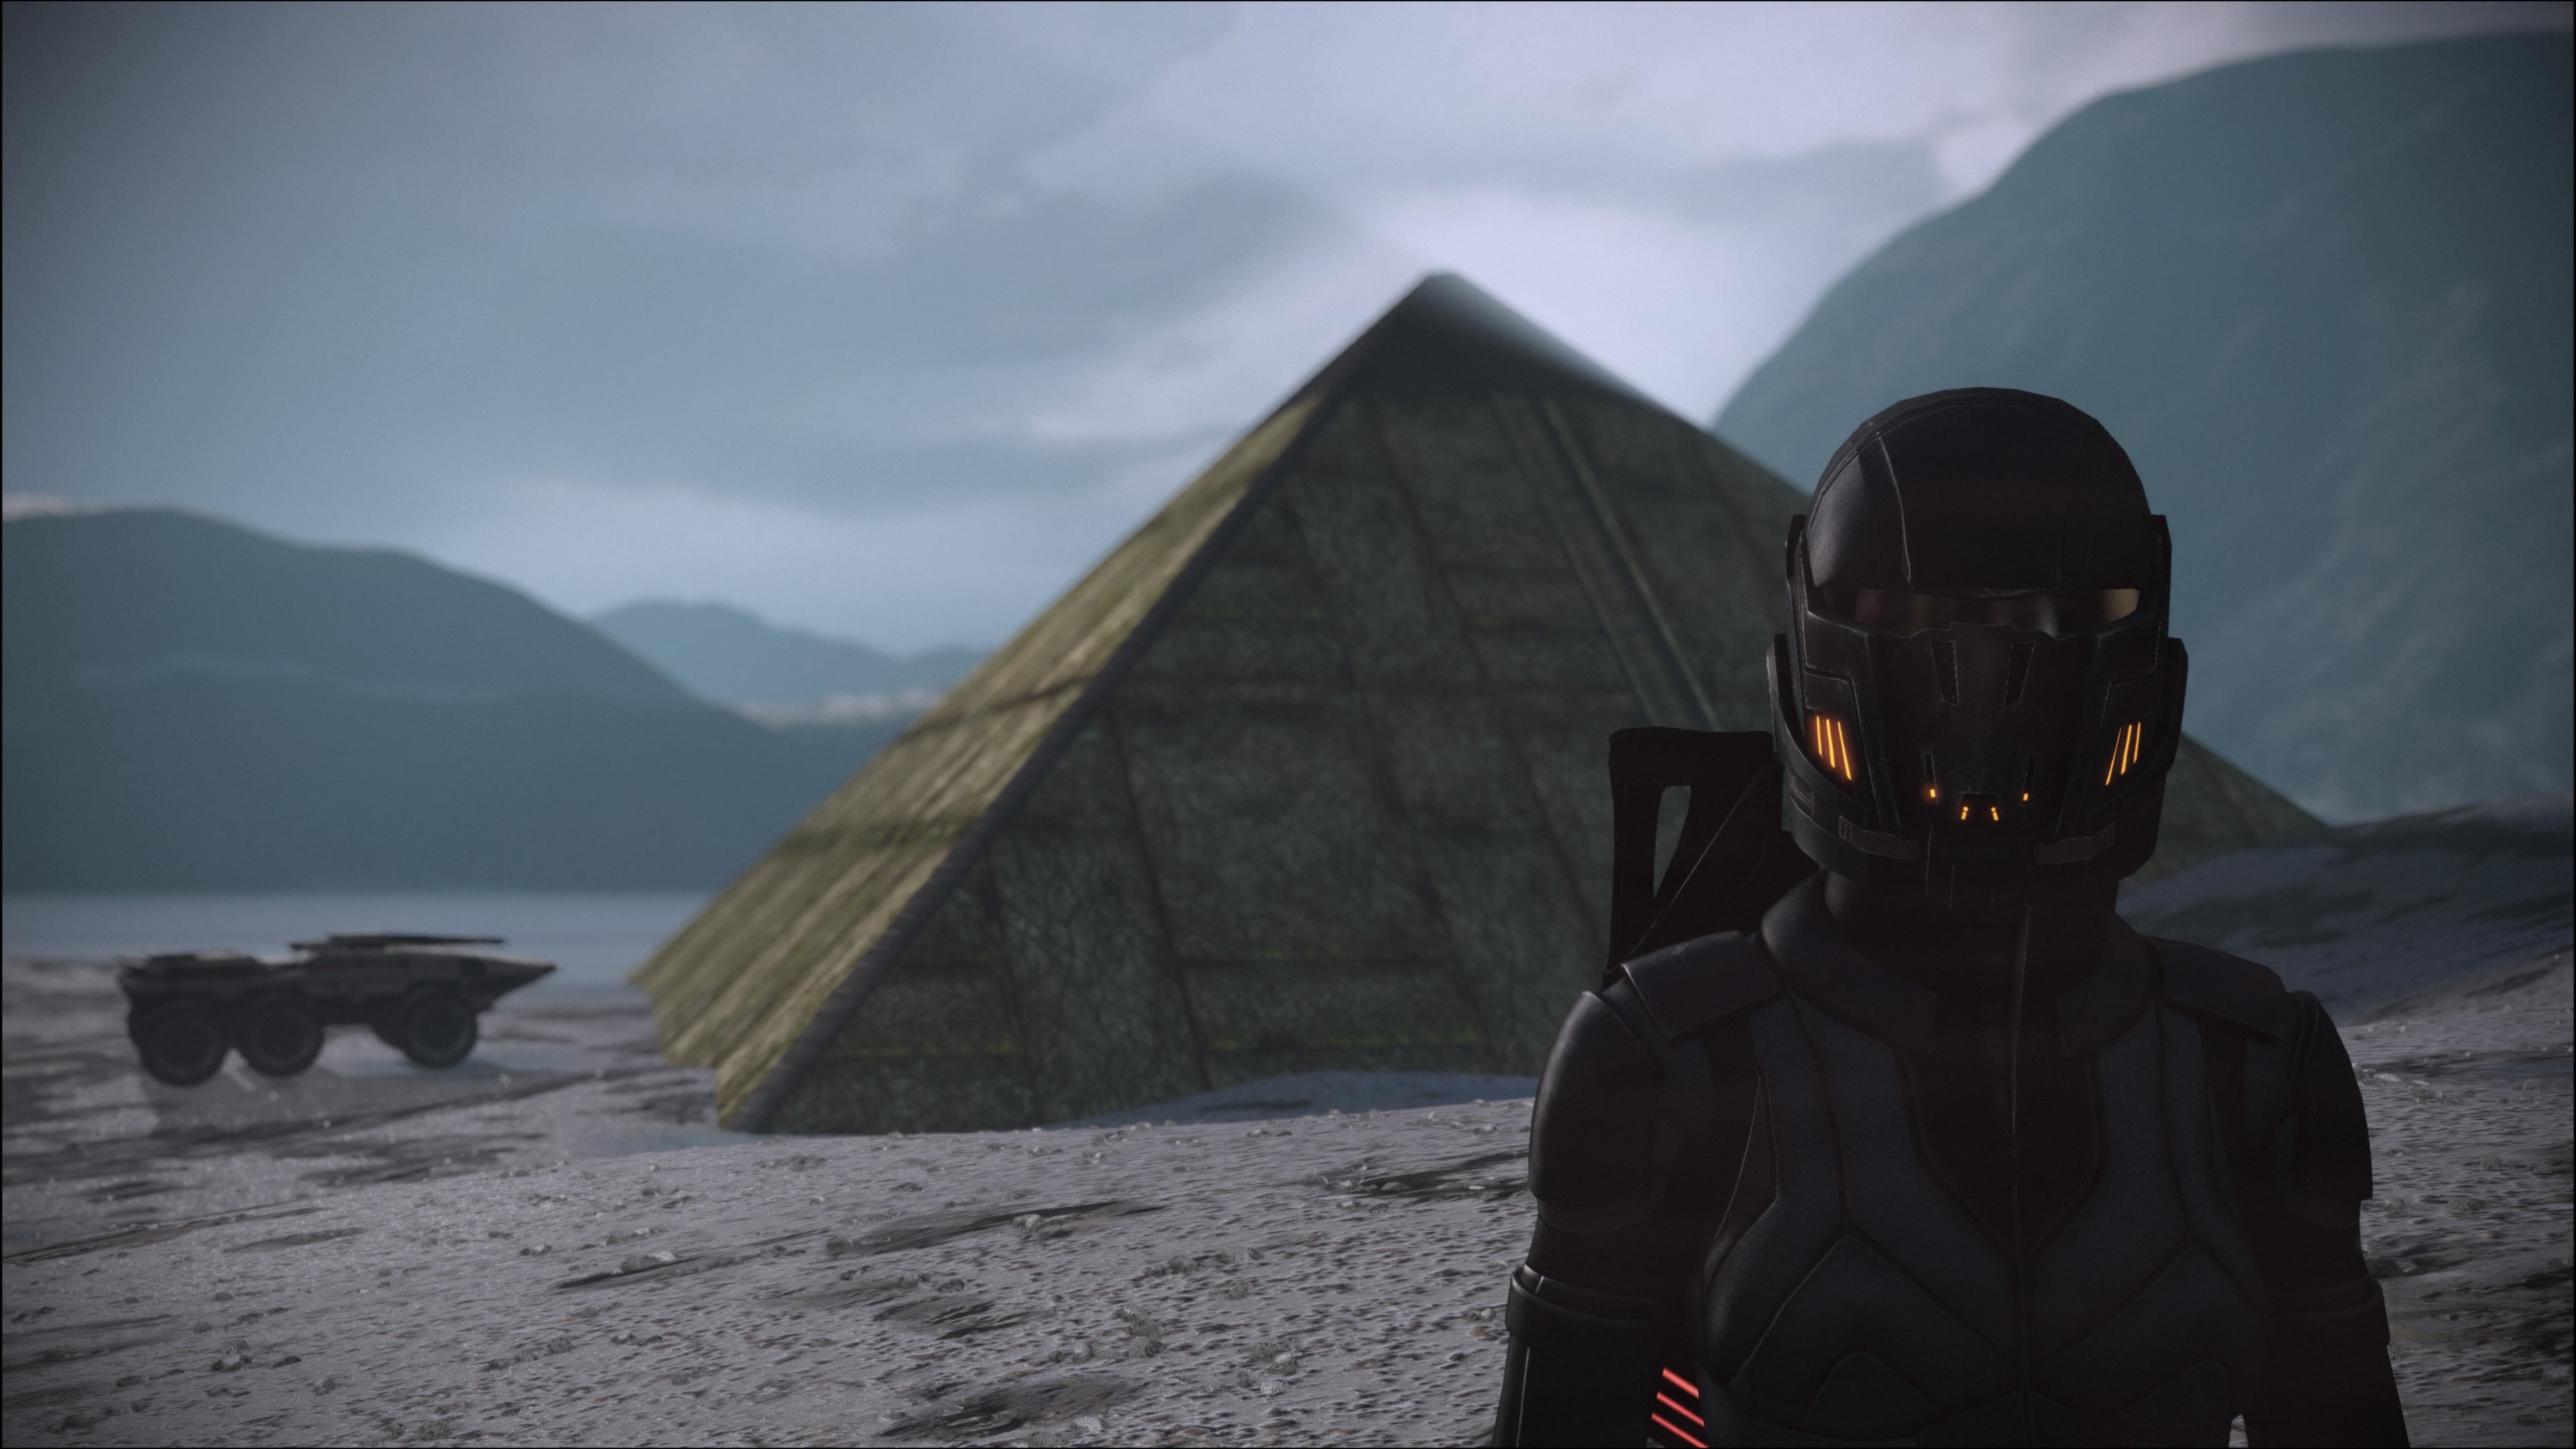 Shepard stood in front of a prothean pyramid on a random planet. The Mako is also there.